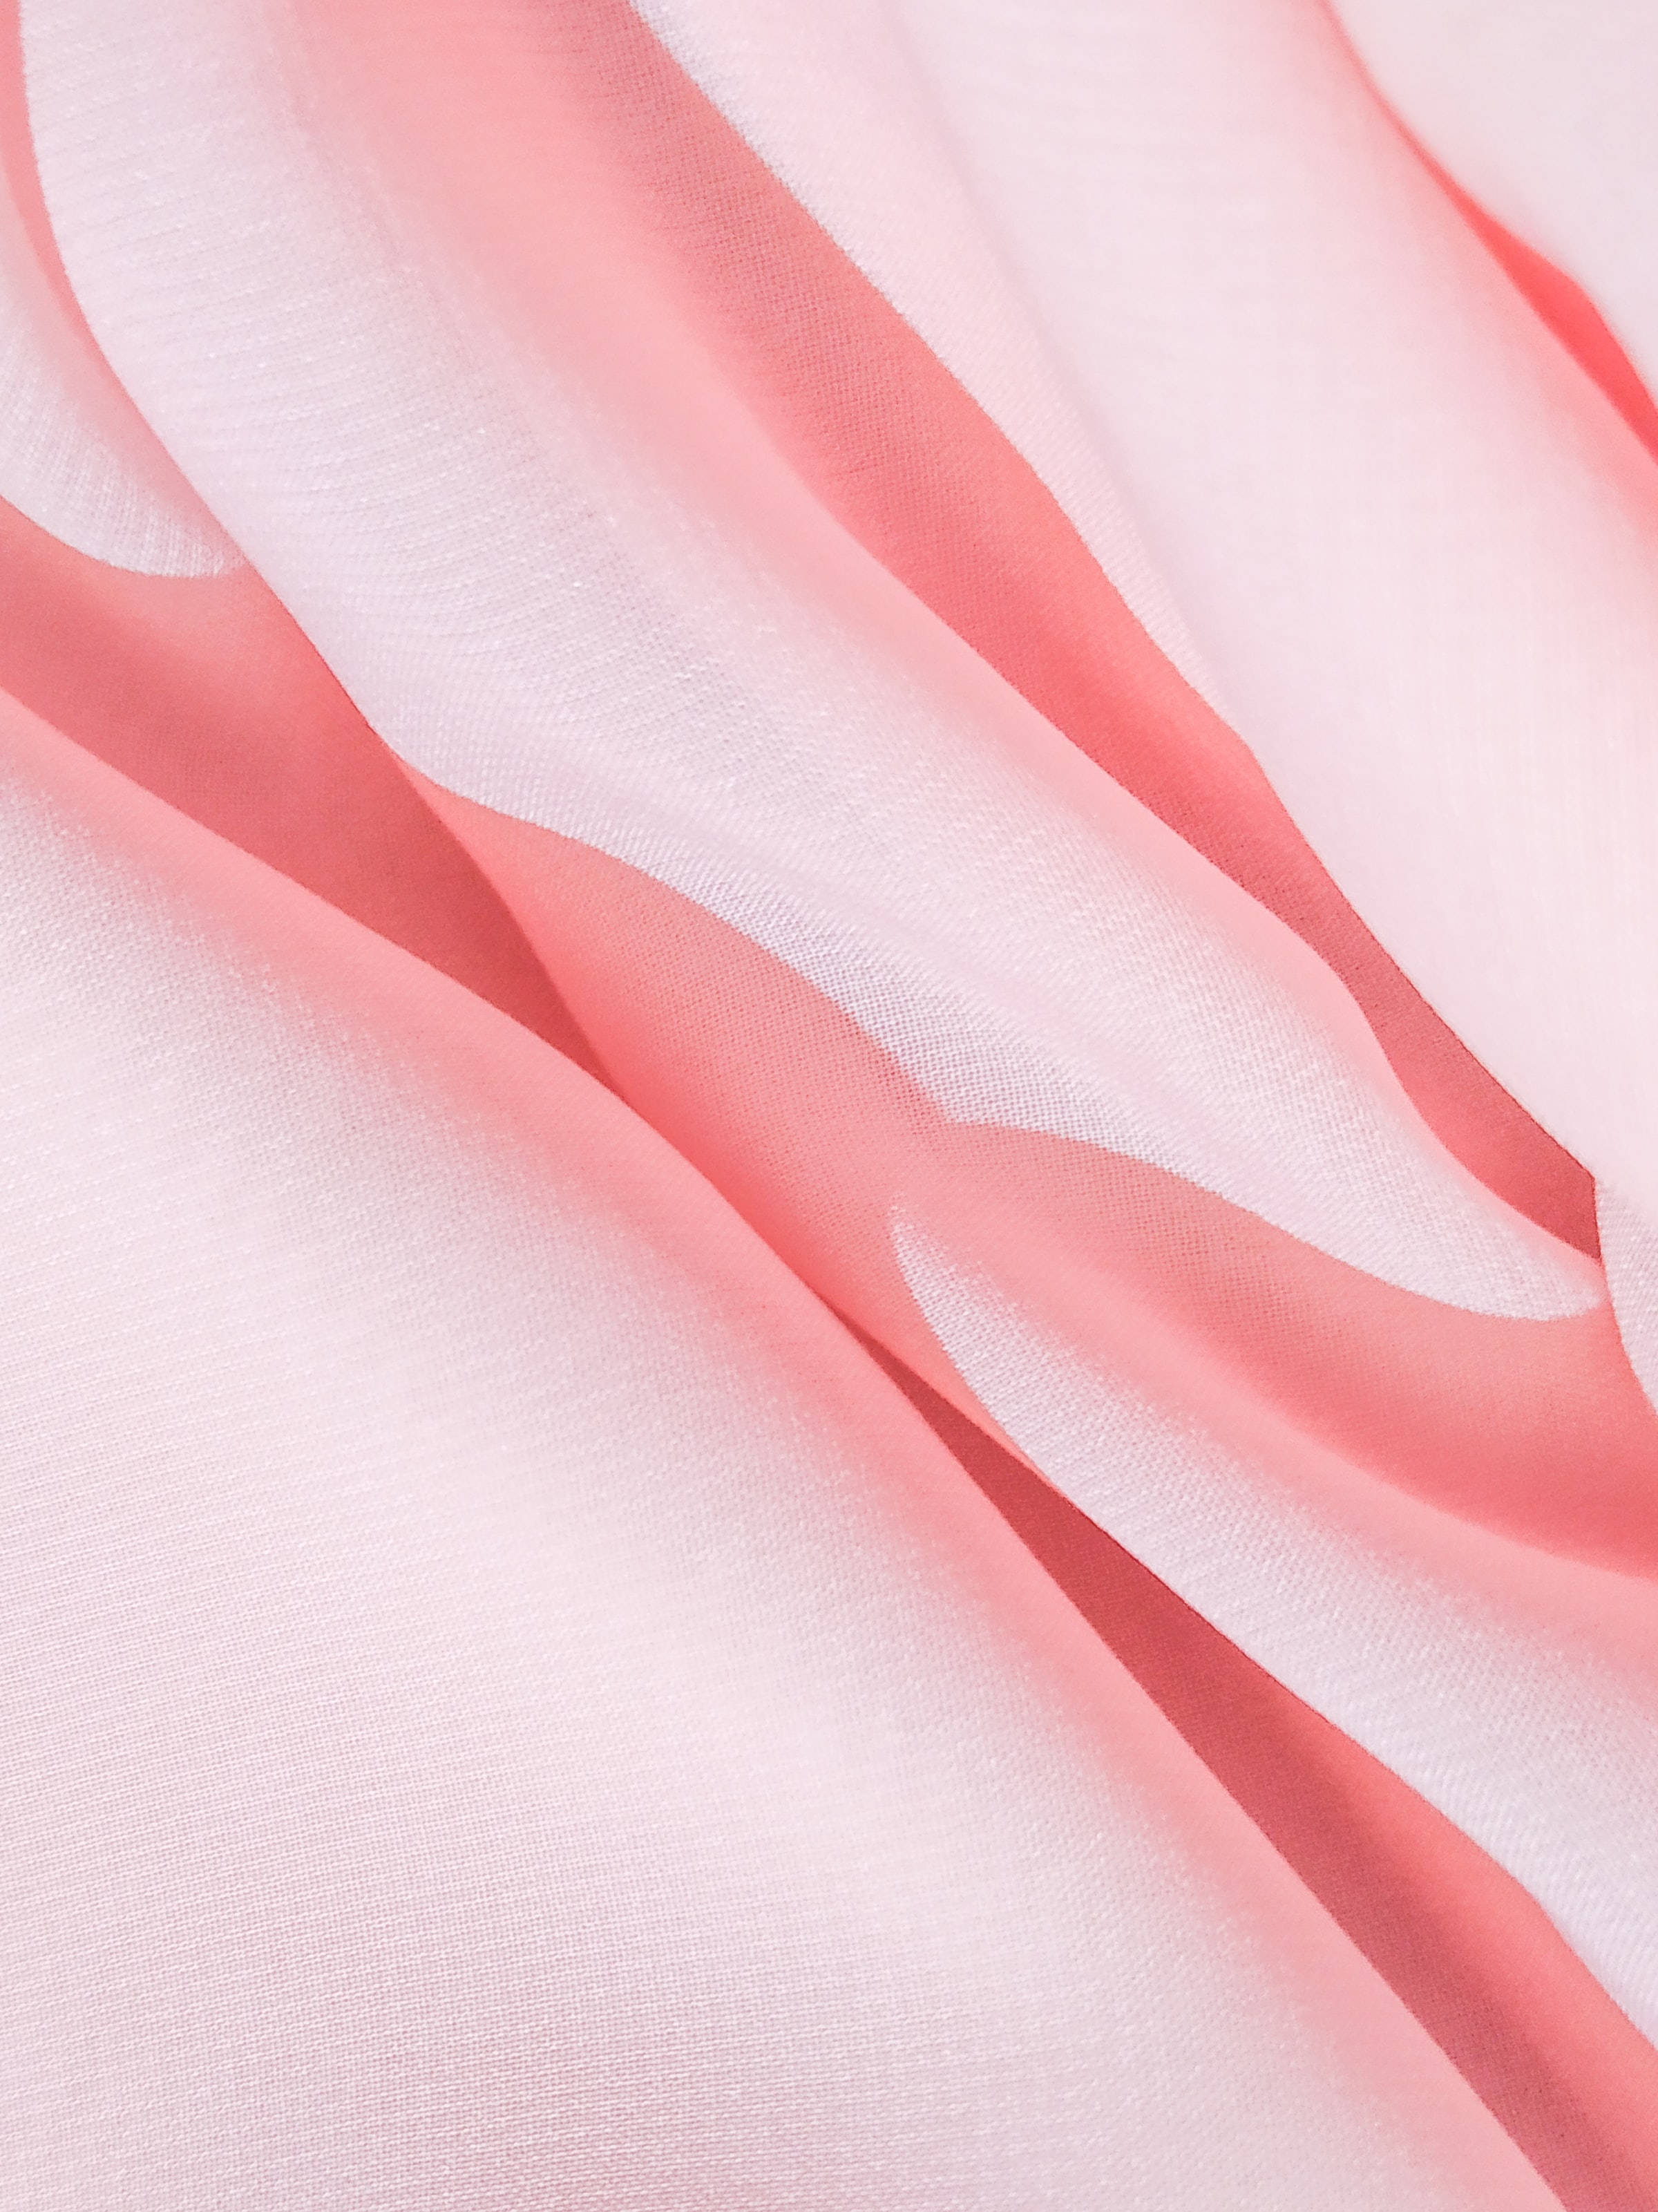 Cute Pink Aesthetic Silk Fabric Texture Picture